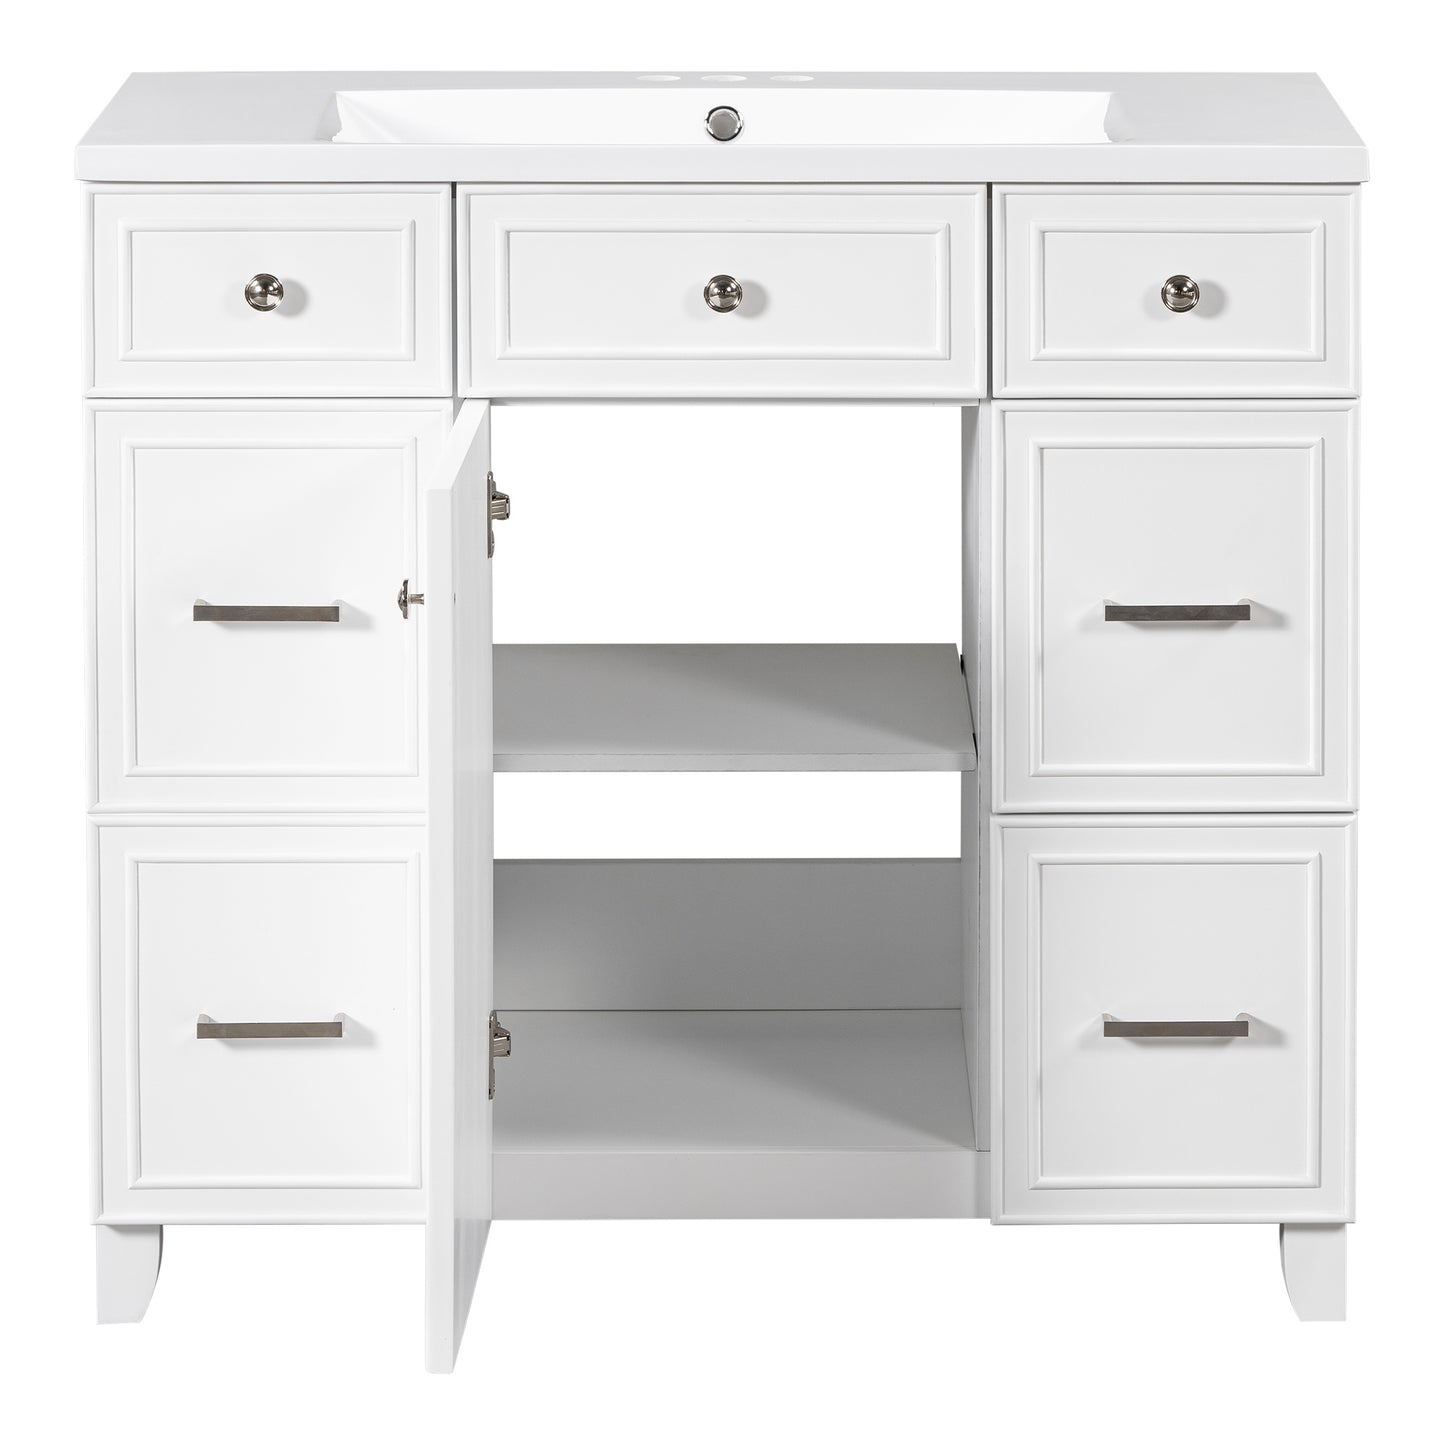 36" Bathroom Vanity Cabinet with Sink Top Combo Set,White,Single Sink,Shaker Cabinet with Soft Closing Door and Drawer